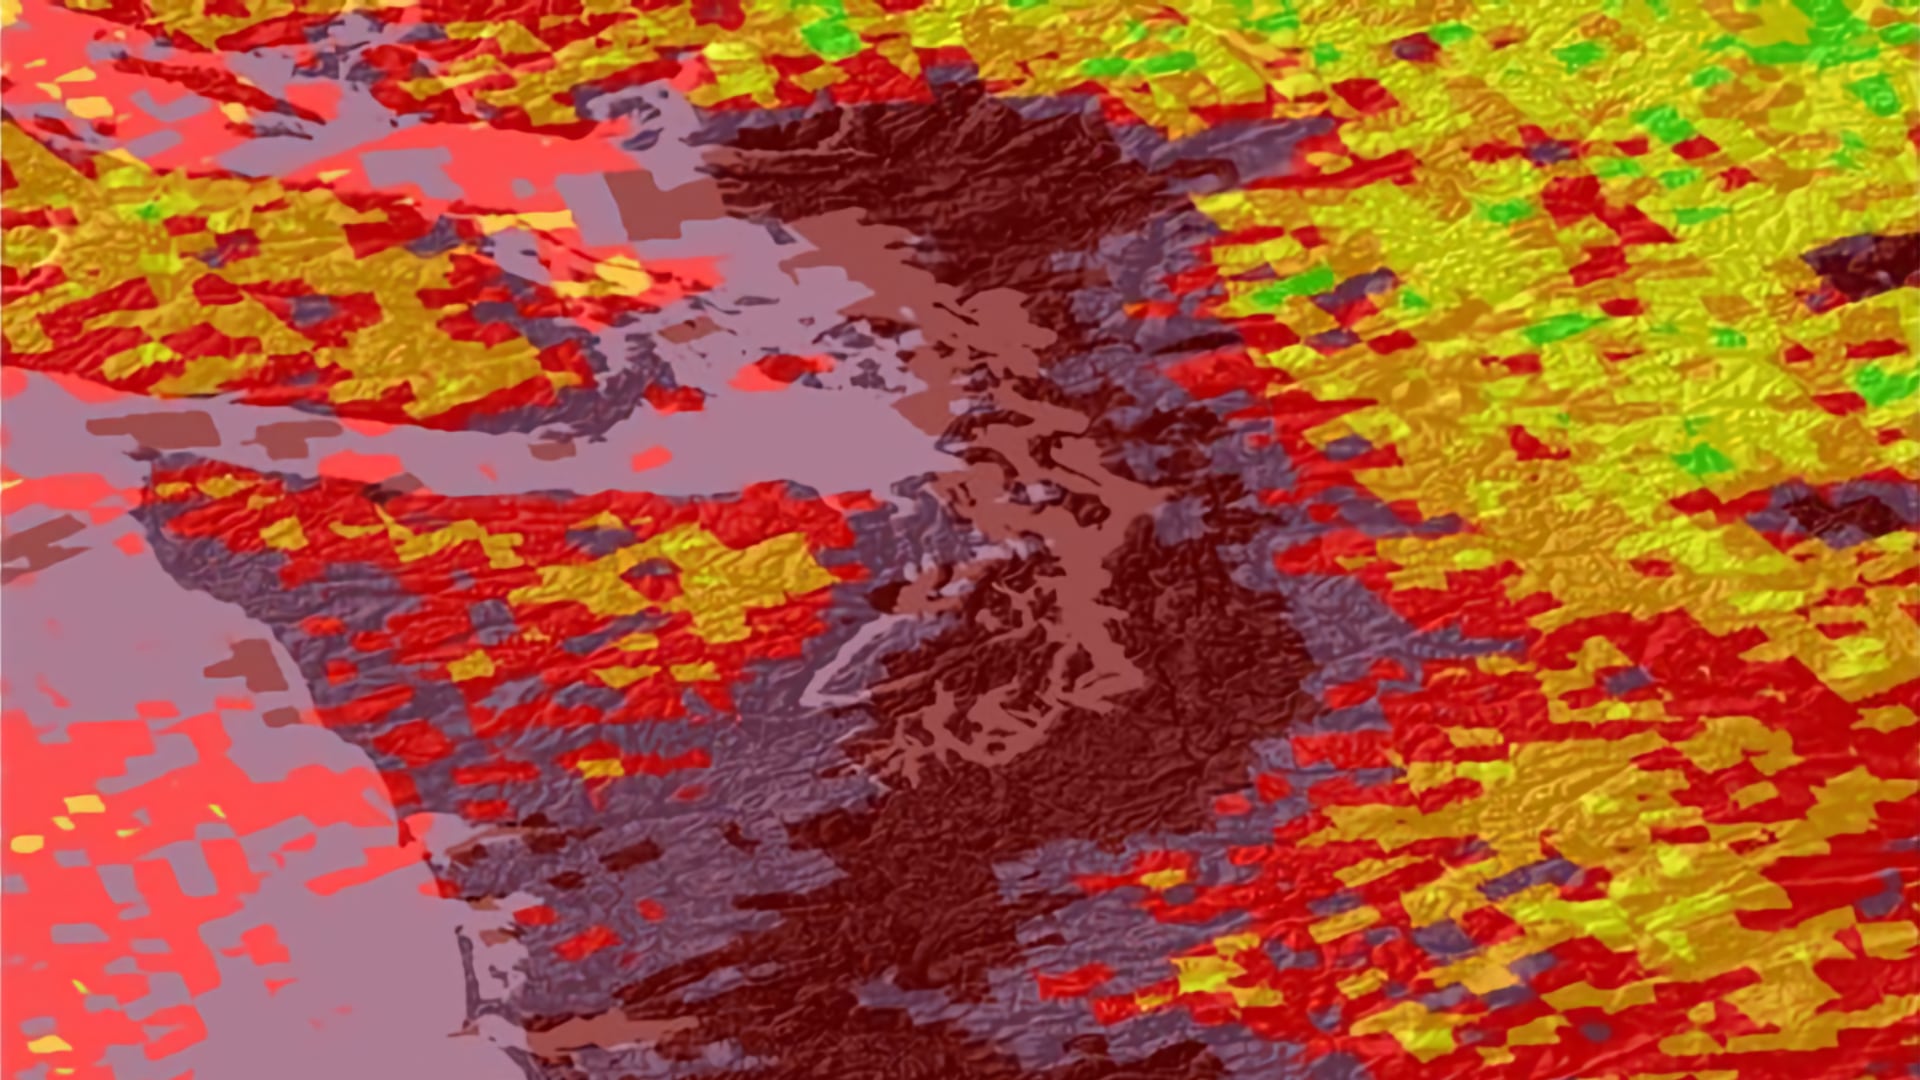 Imagery from Sentinel-5P Offline Nitrogen Dioxide dataset over the Puget Sound in Washington State. Data for hillshade sourced from the Shuttle Radar Topography Mission. Aerosol layer has been classified according to the EPA's Air Quality system, with green indicating healthy conditions, to maroon, which indicates hazardous air quality. A poor air quality event is displayed from August 14, 2018, when an inversion was compounded with wildfire particulate coming from British Columbia and western Washington.  Keywords: Public health, MODIS, MAIAC, Sentinel-5P TROPOMI, Google Earth Engine, CALIPSO CALIOP